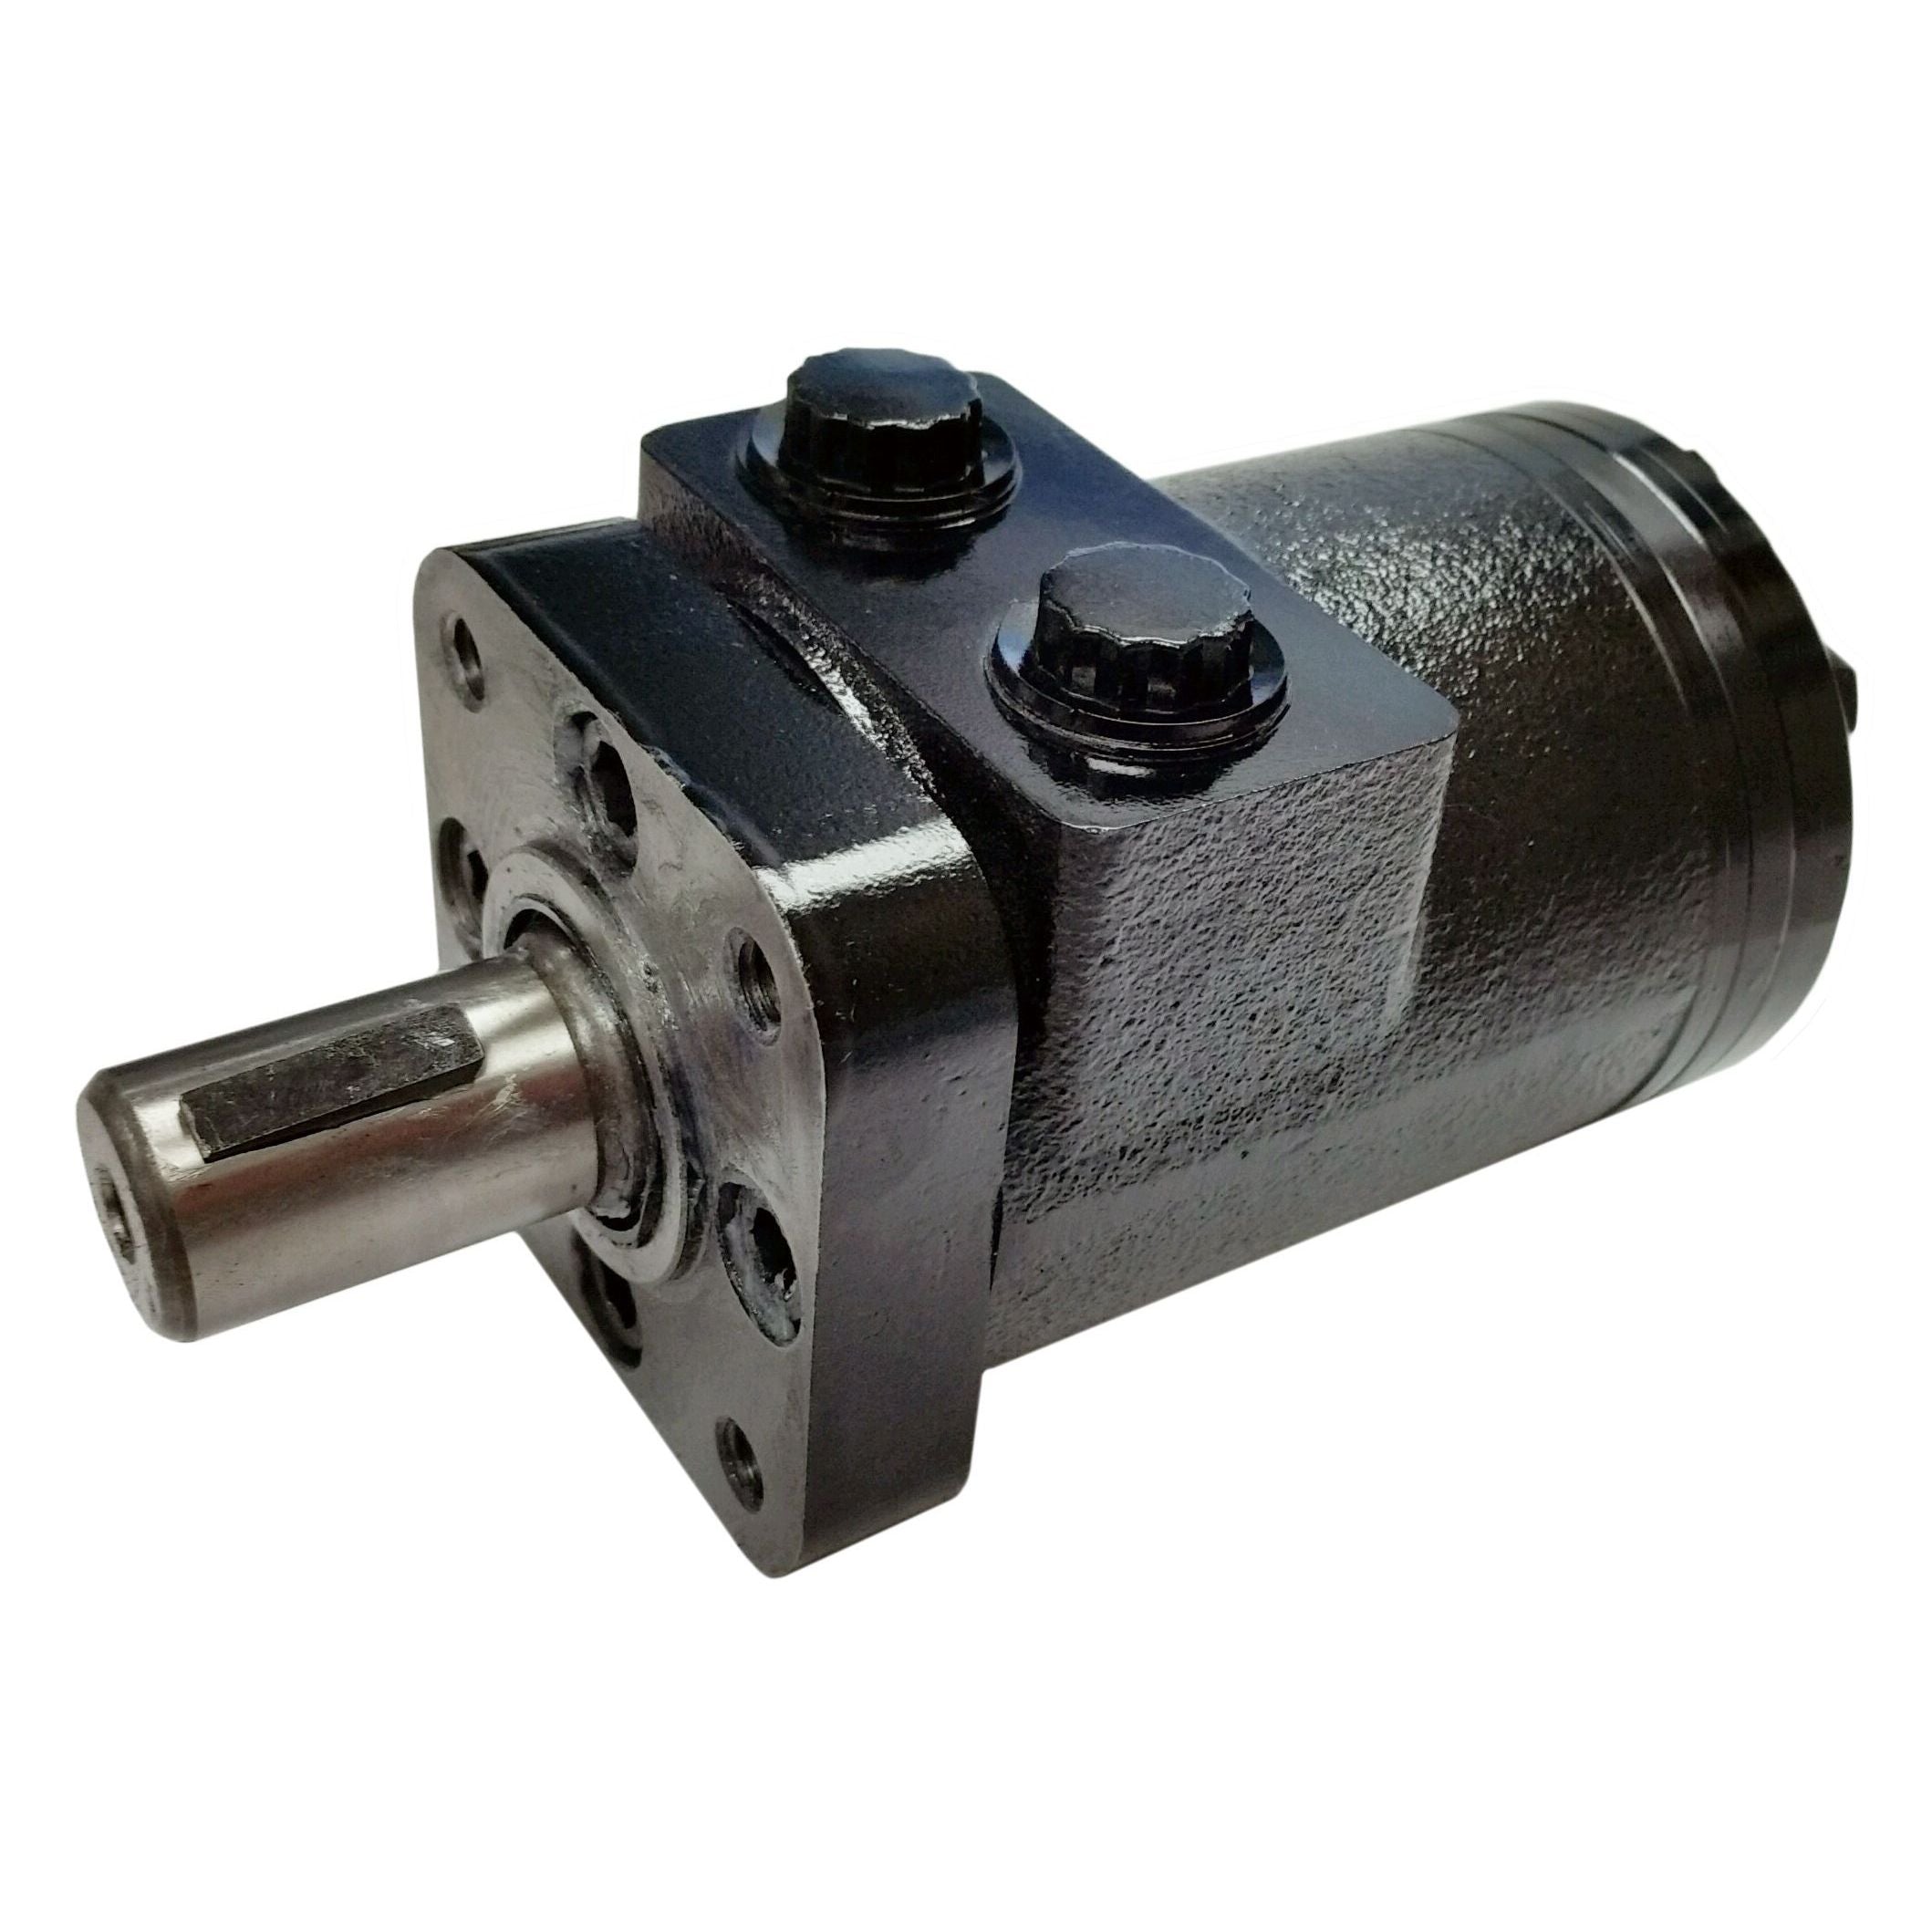 BMPH-50-H4-K-F : Dynamic LSHT Motor, 51.7cc, 1150RPM, 885in-lb, 2031psi Differential, 15.85GPM, SAE A 4-Bolt Mount, 1" Bore x 1/4" Key Shaft, Side Ported, Manifold